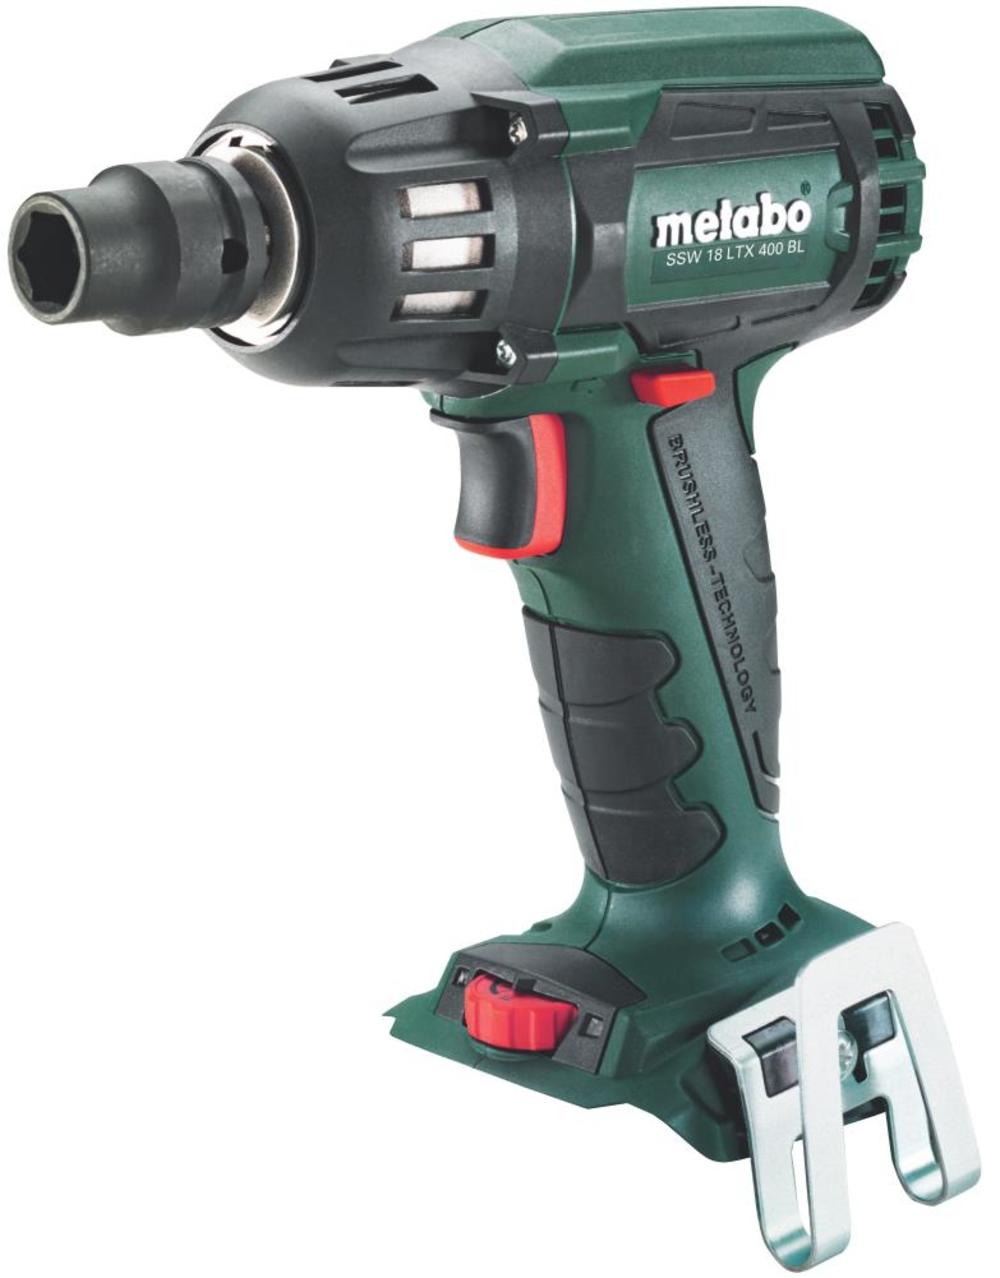 Metabo SSW 18 LTX 400 BL Impact Wrench Cordless Bare Tool